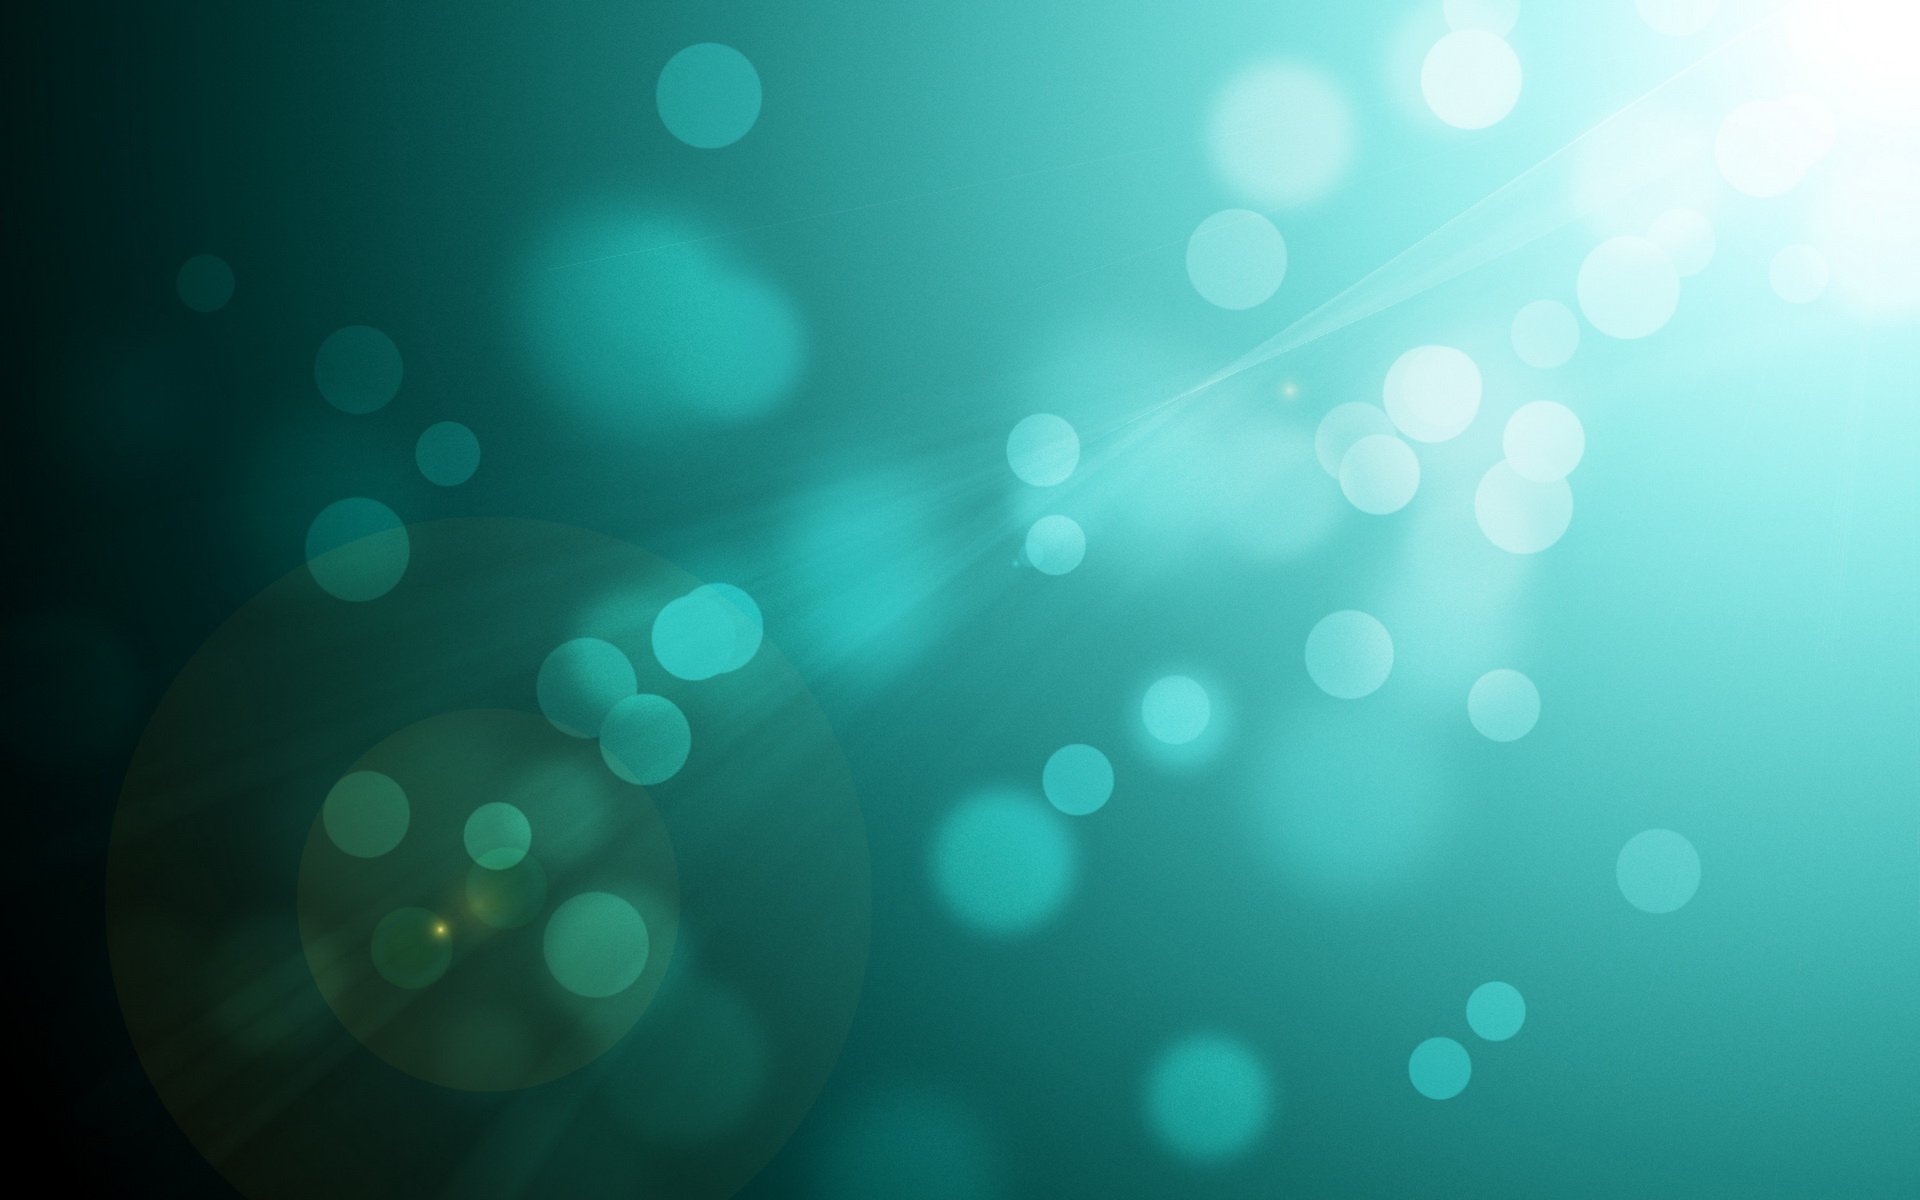 Abstract Turquoise Hd Wallpaper